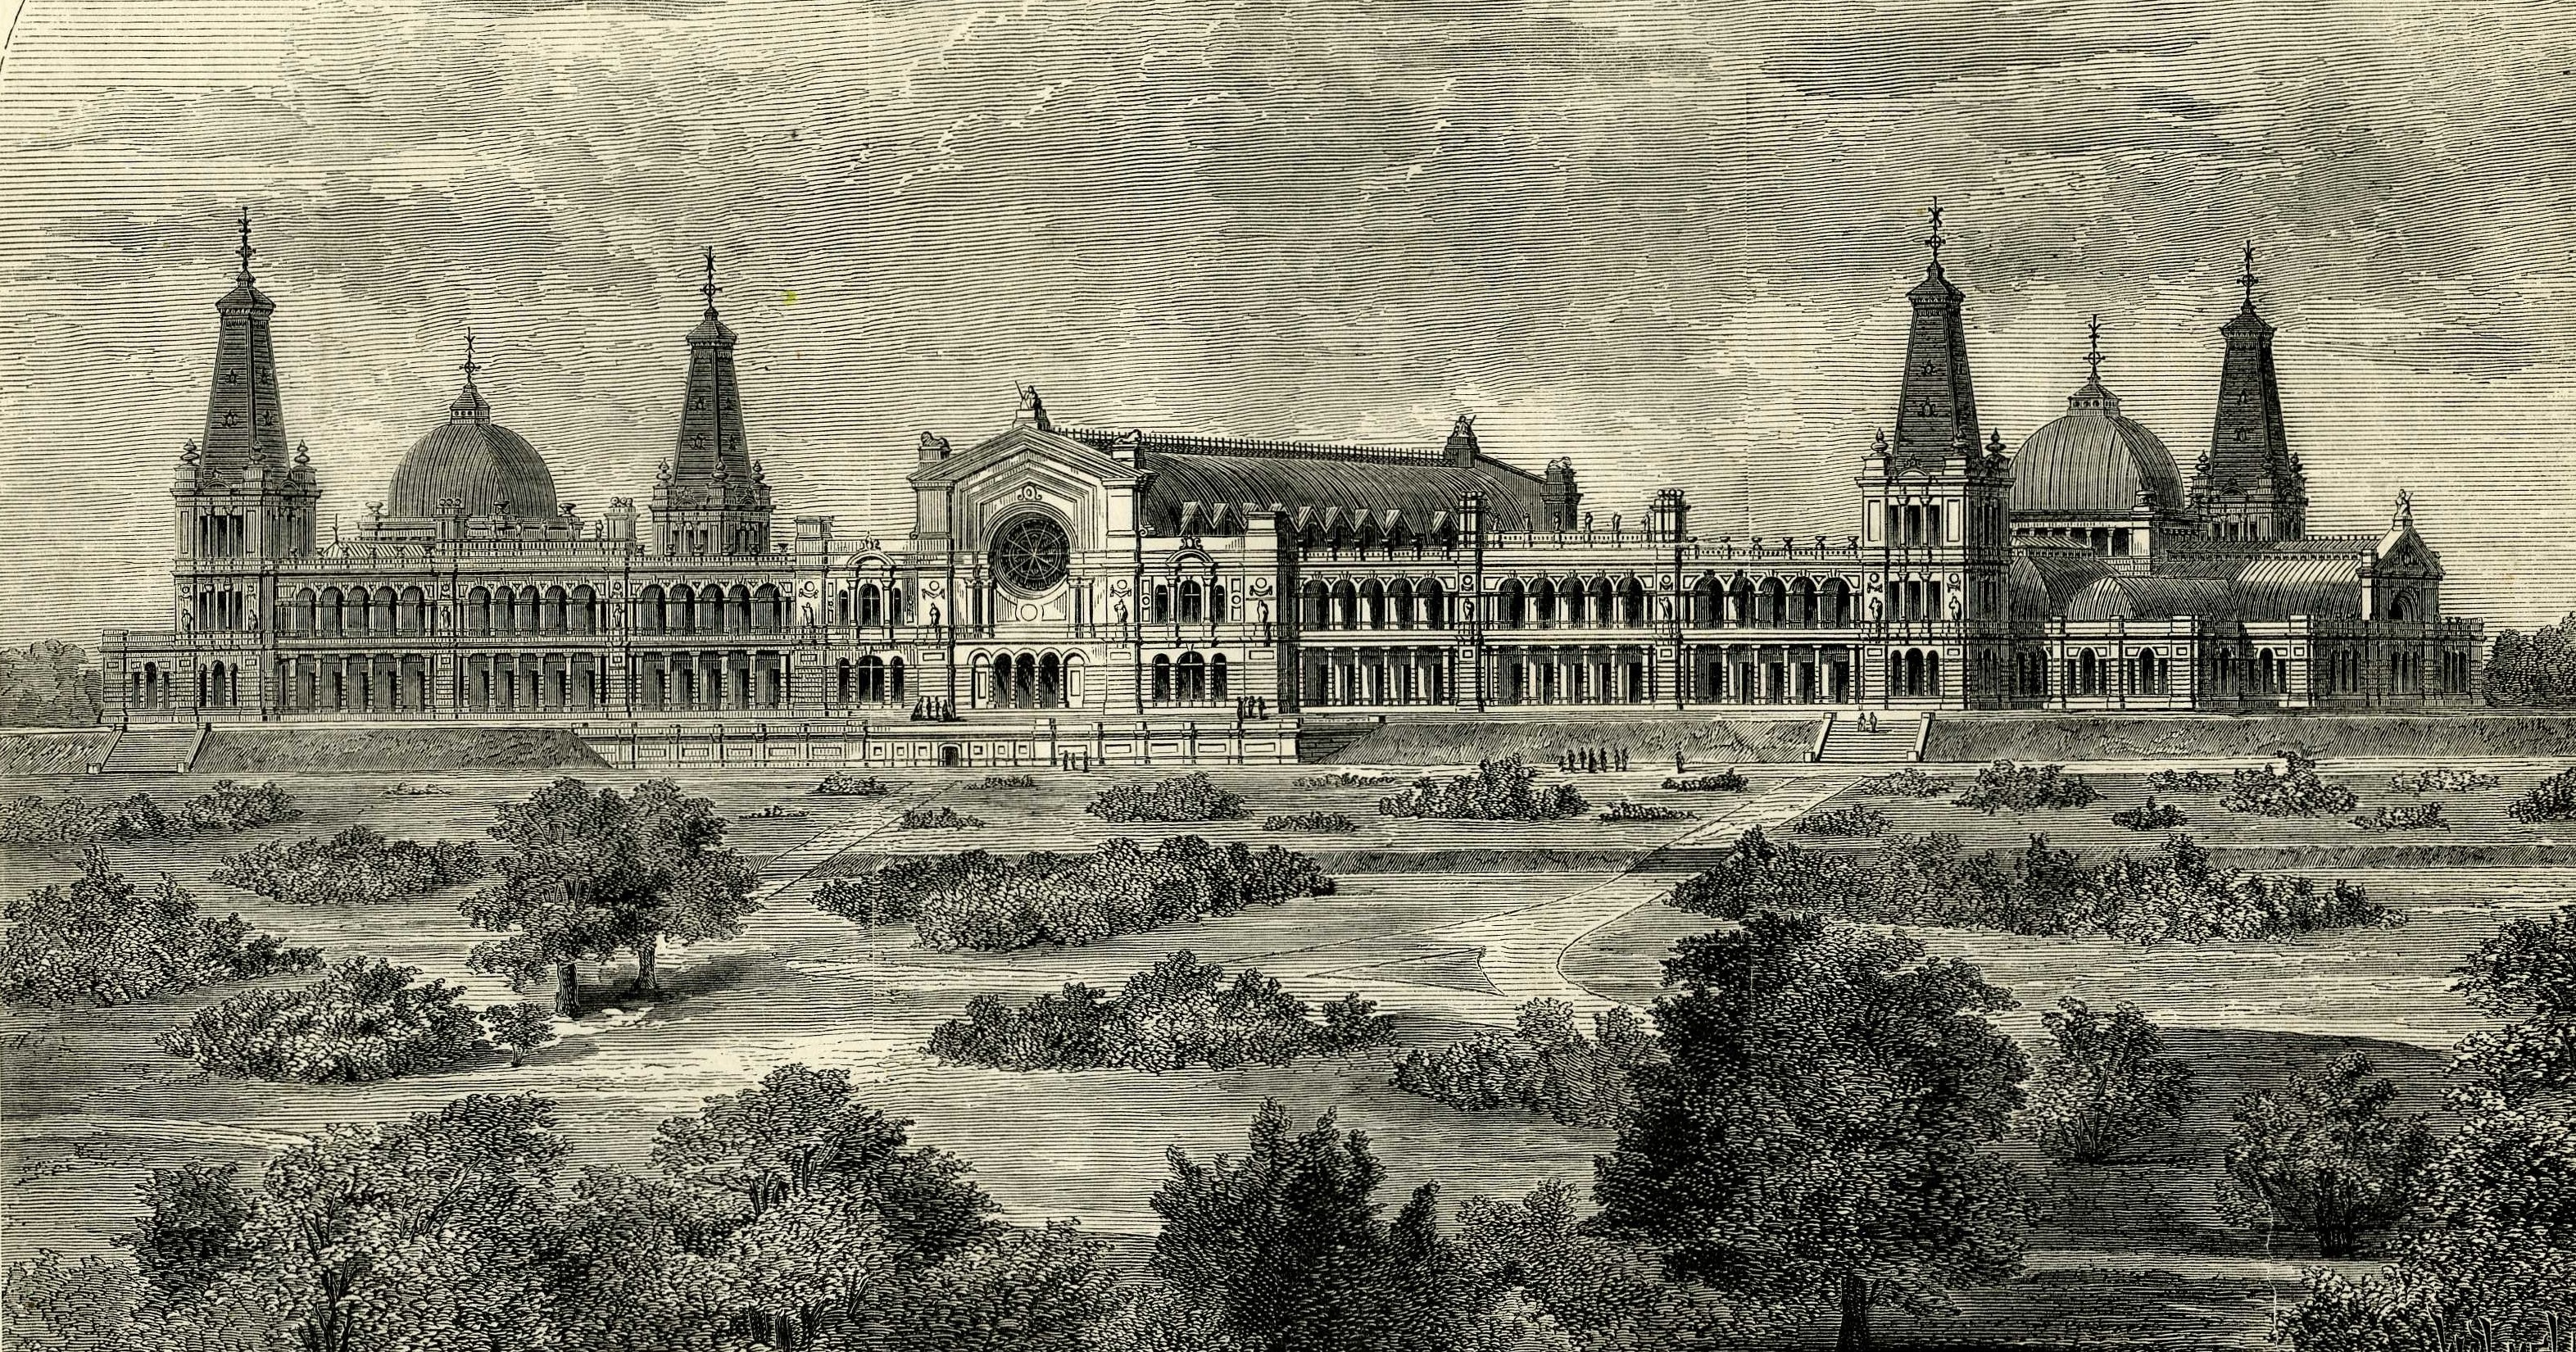 Alexandra Palace opened to the public on 24 May 1873 and tragically burnt down 16 days later. The second Palace opened two years after on 1 May 1875.